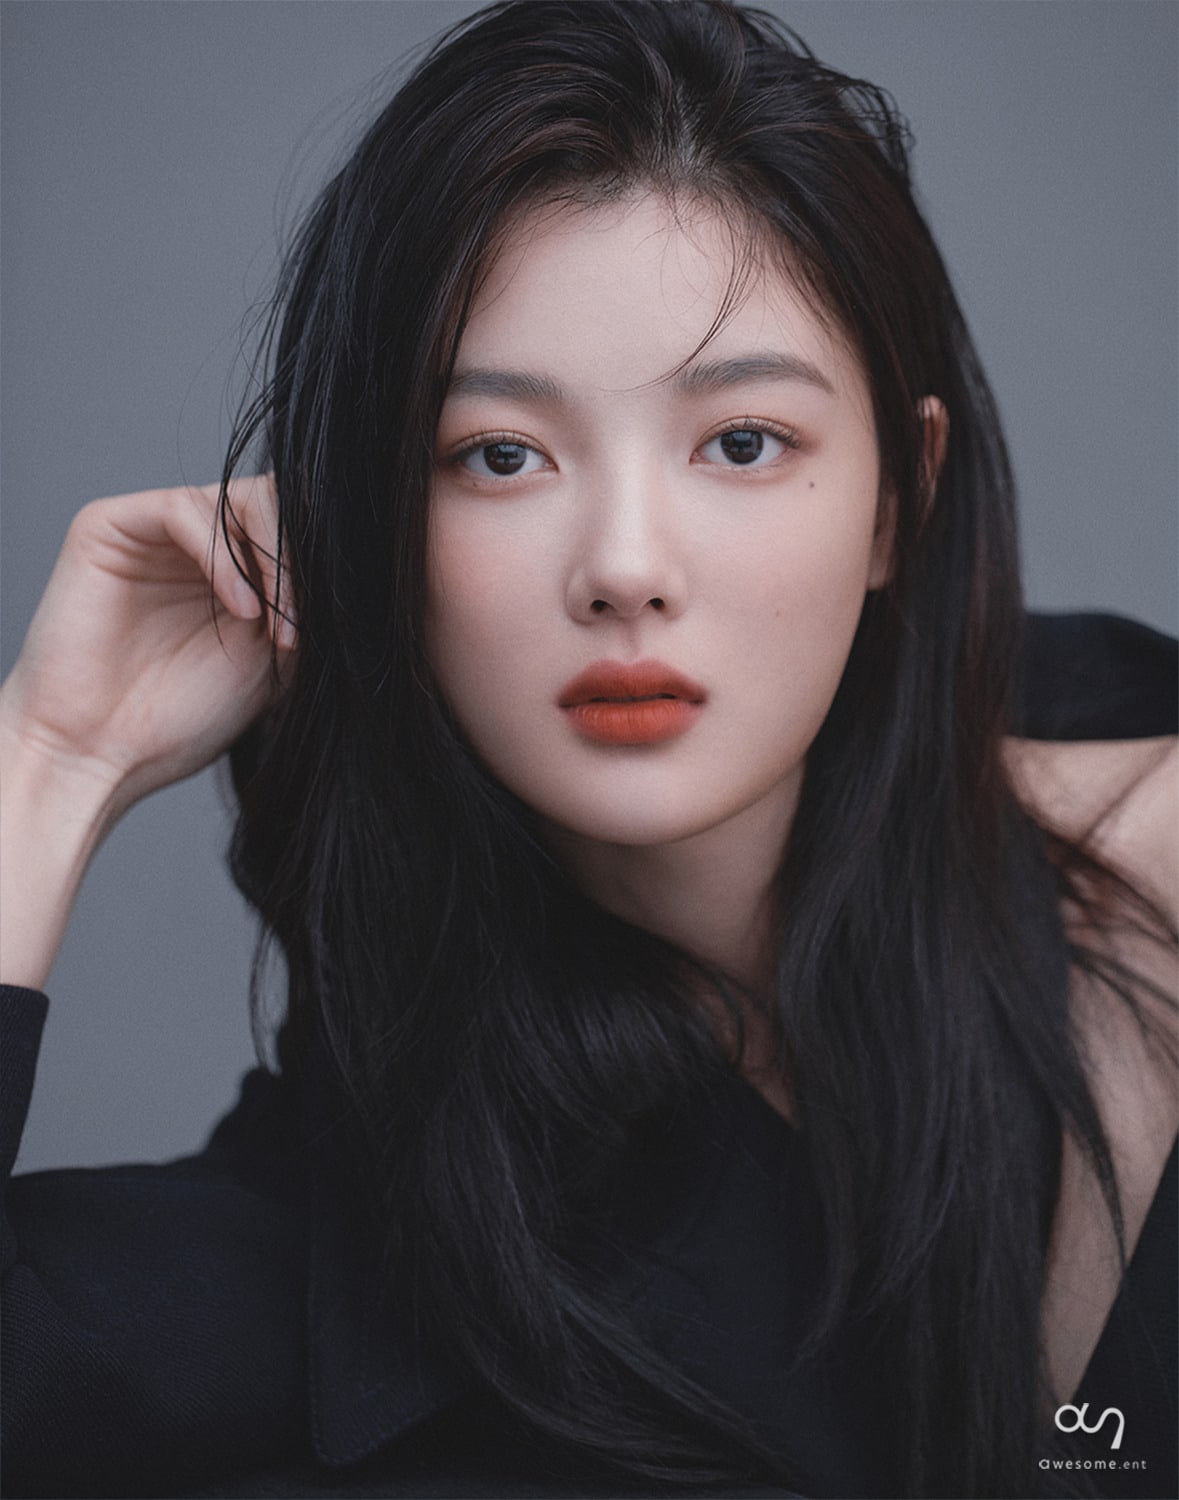 Check out Kim Yoo Jung's Gorgeous Photo from Awesome ENT